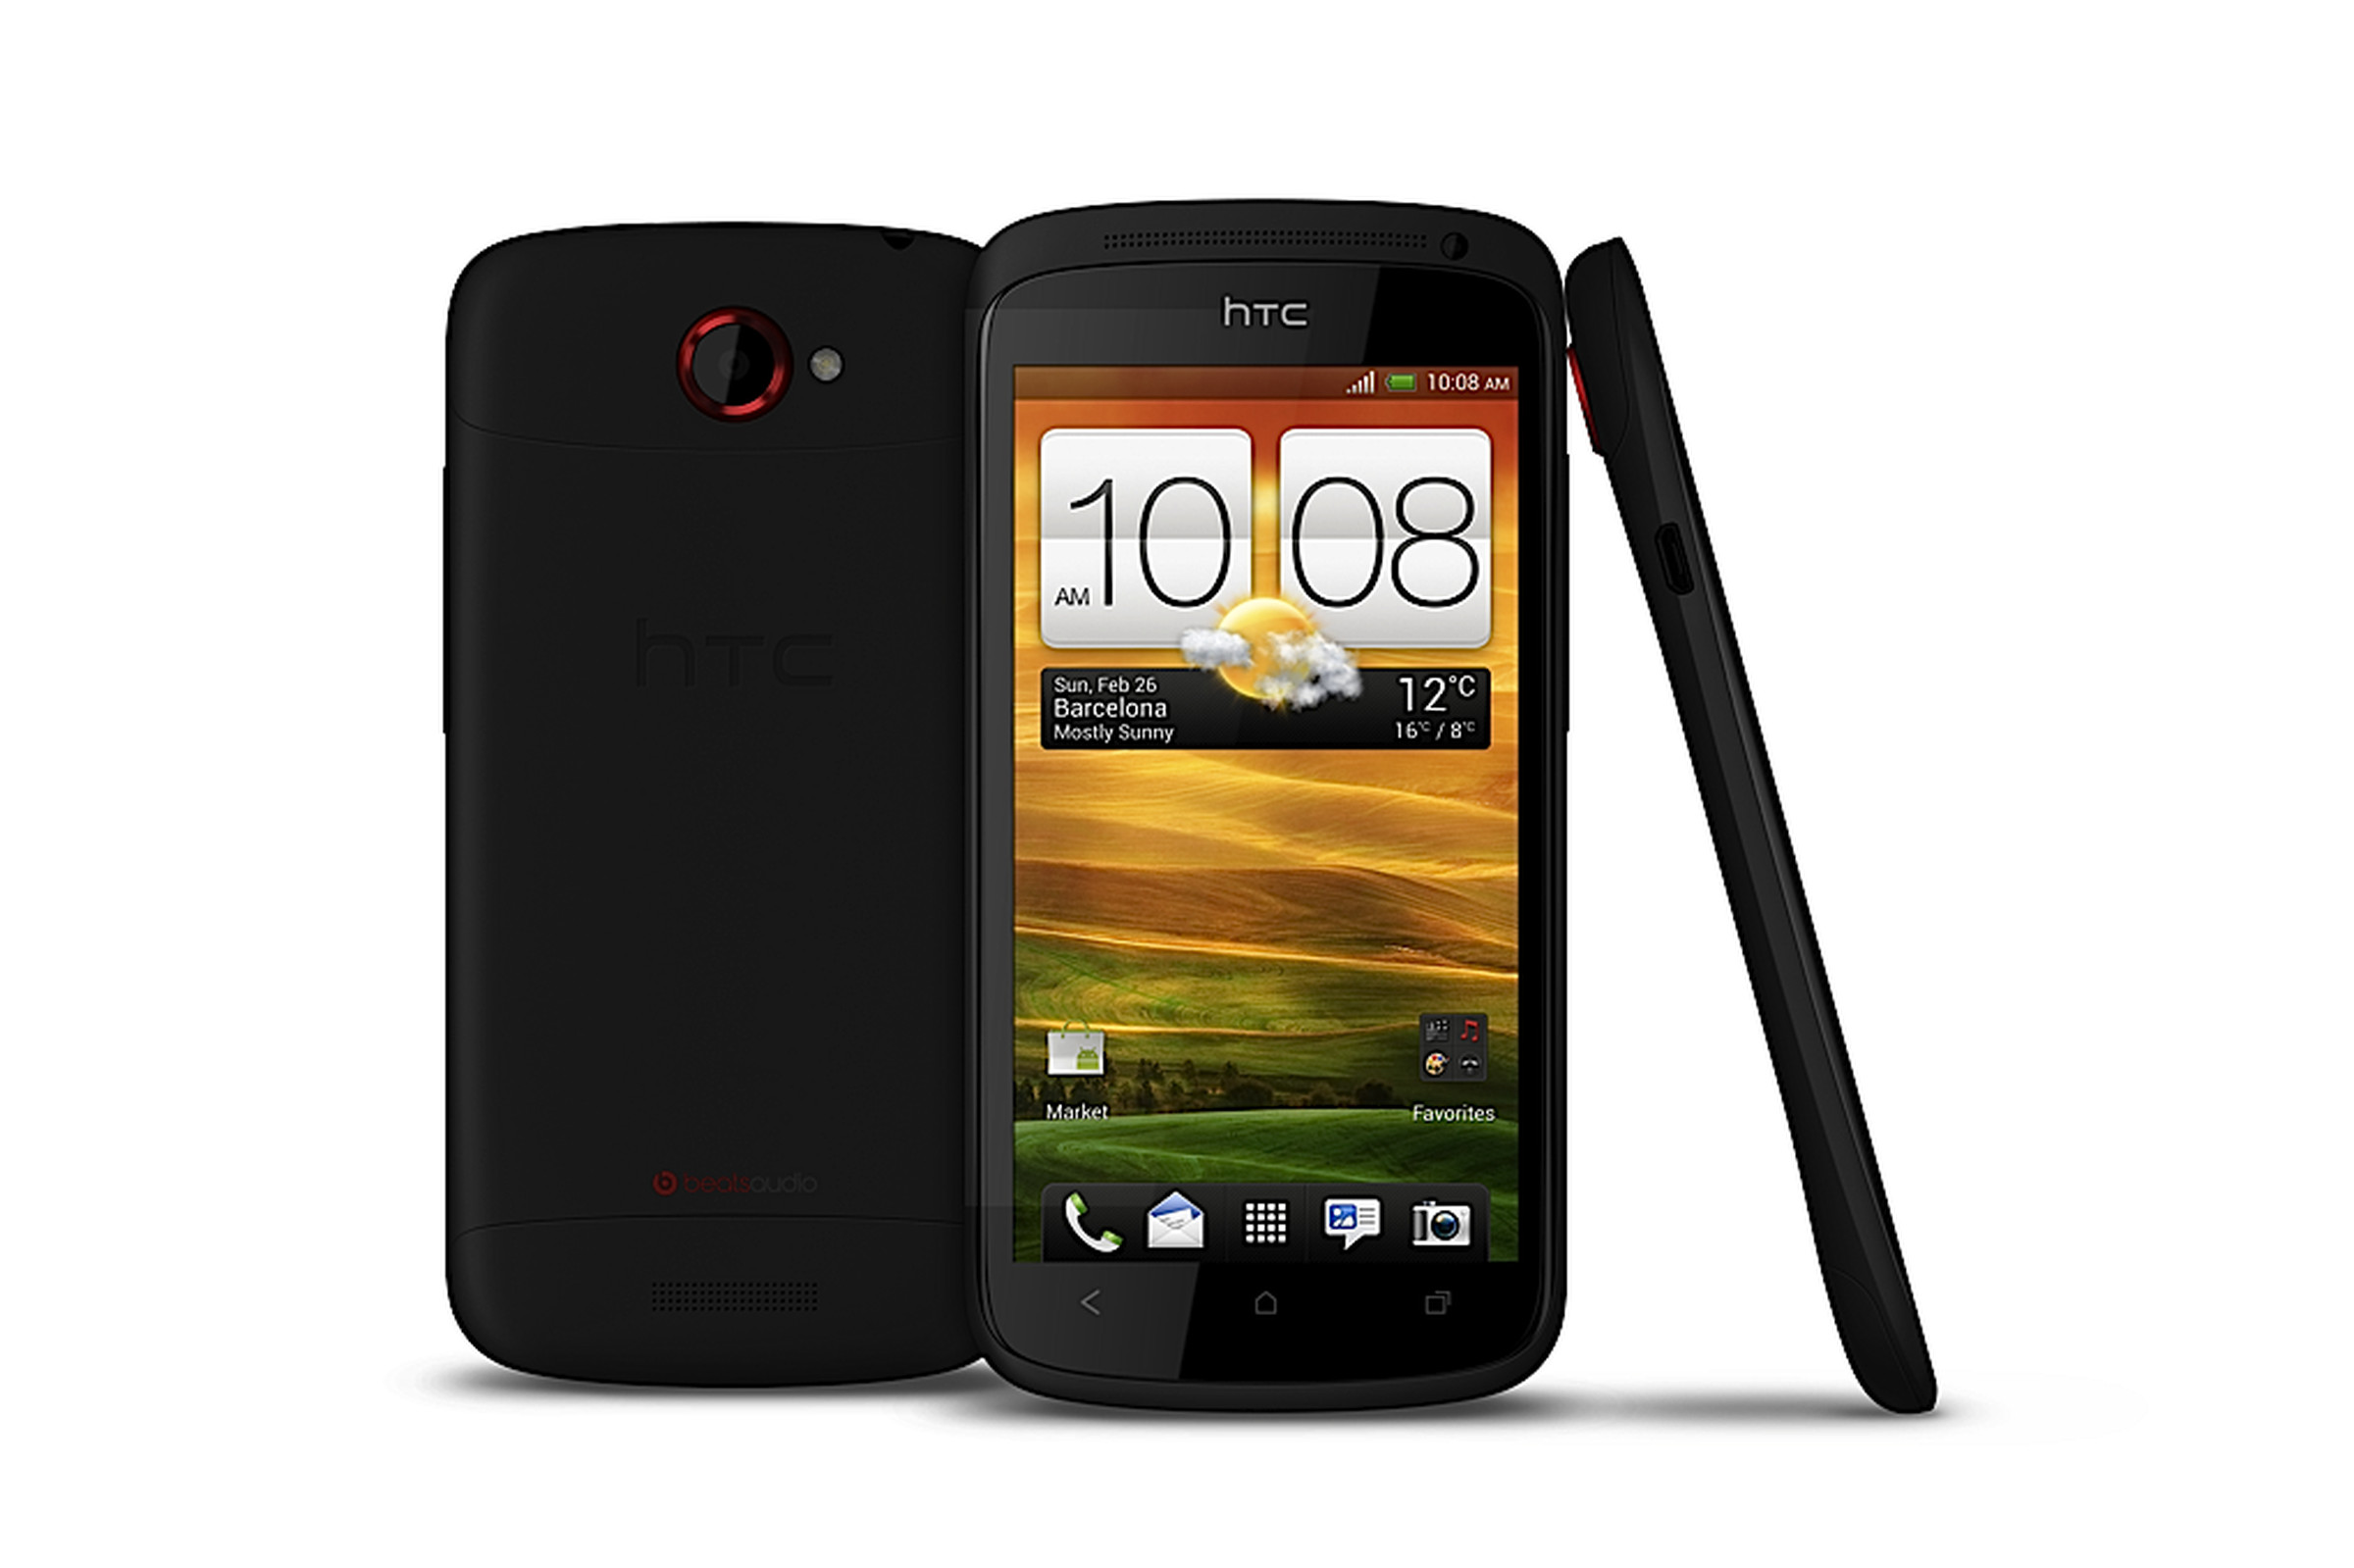 HTC One S announcement photos